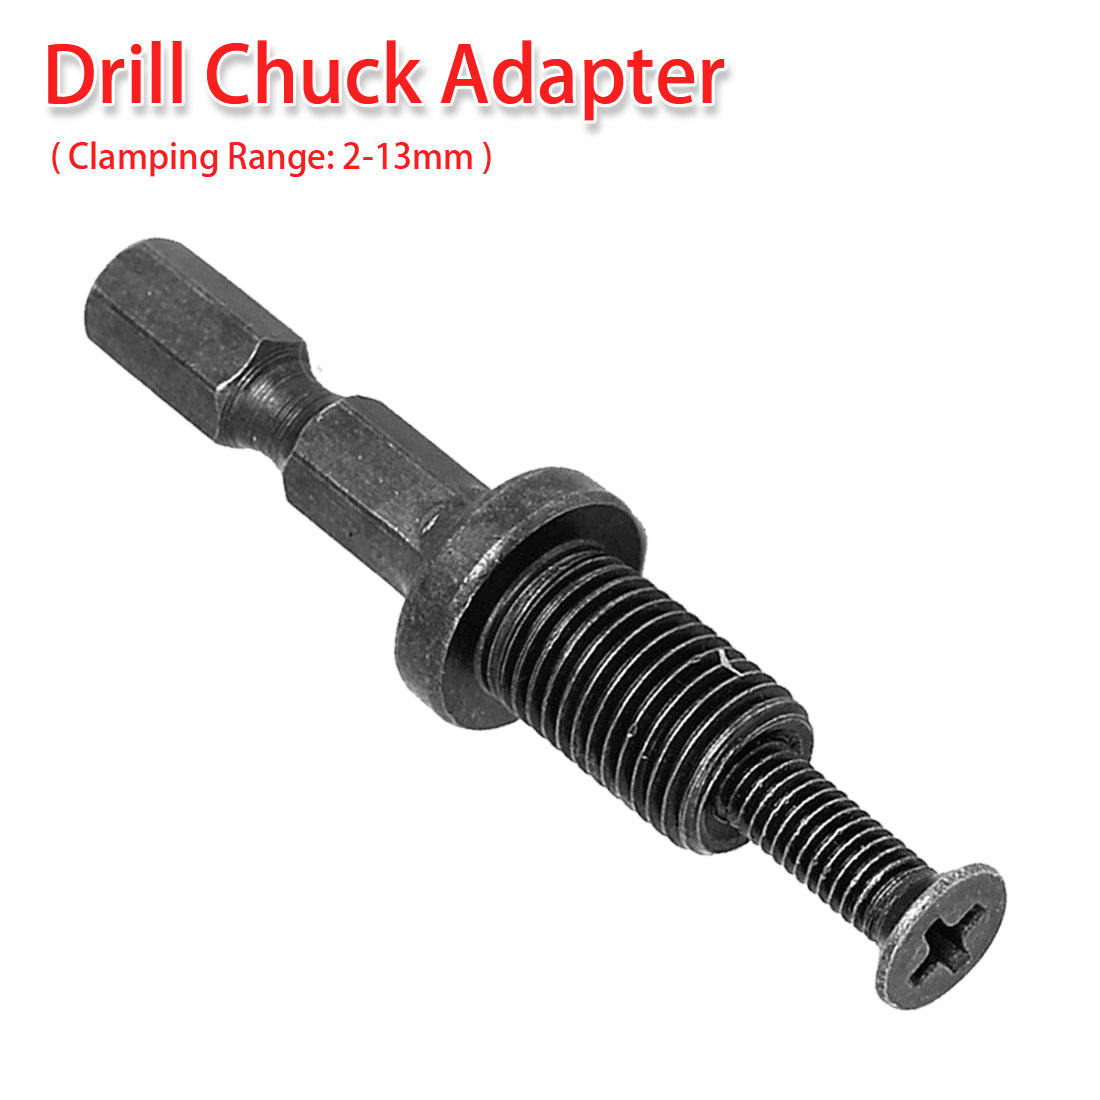 1 pc 1/4 Hex Adapter to 3/8"-24UNF Thread with Lock Screw to Drill Chuck NS 